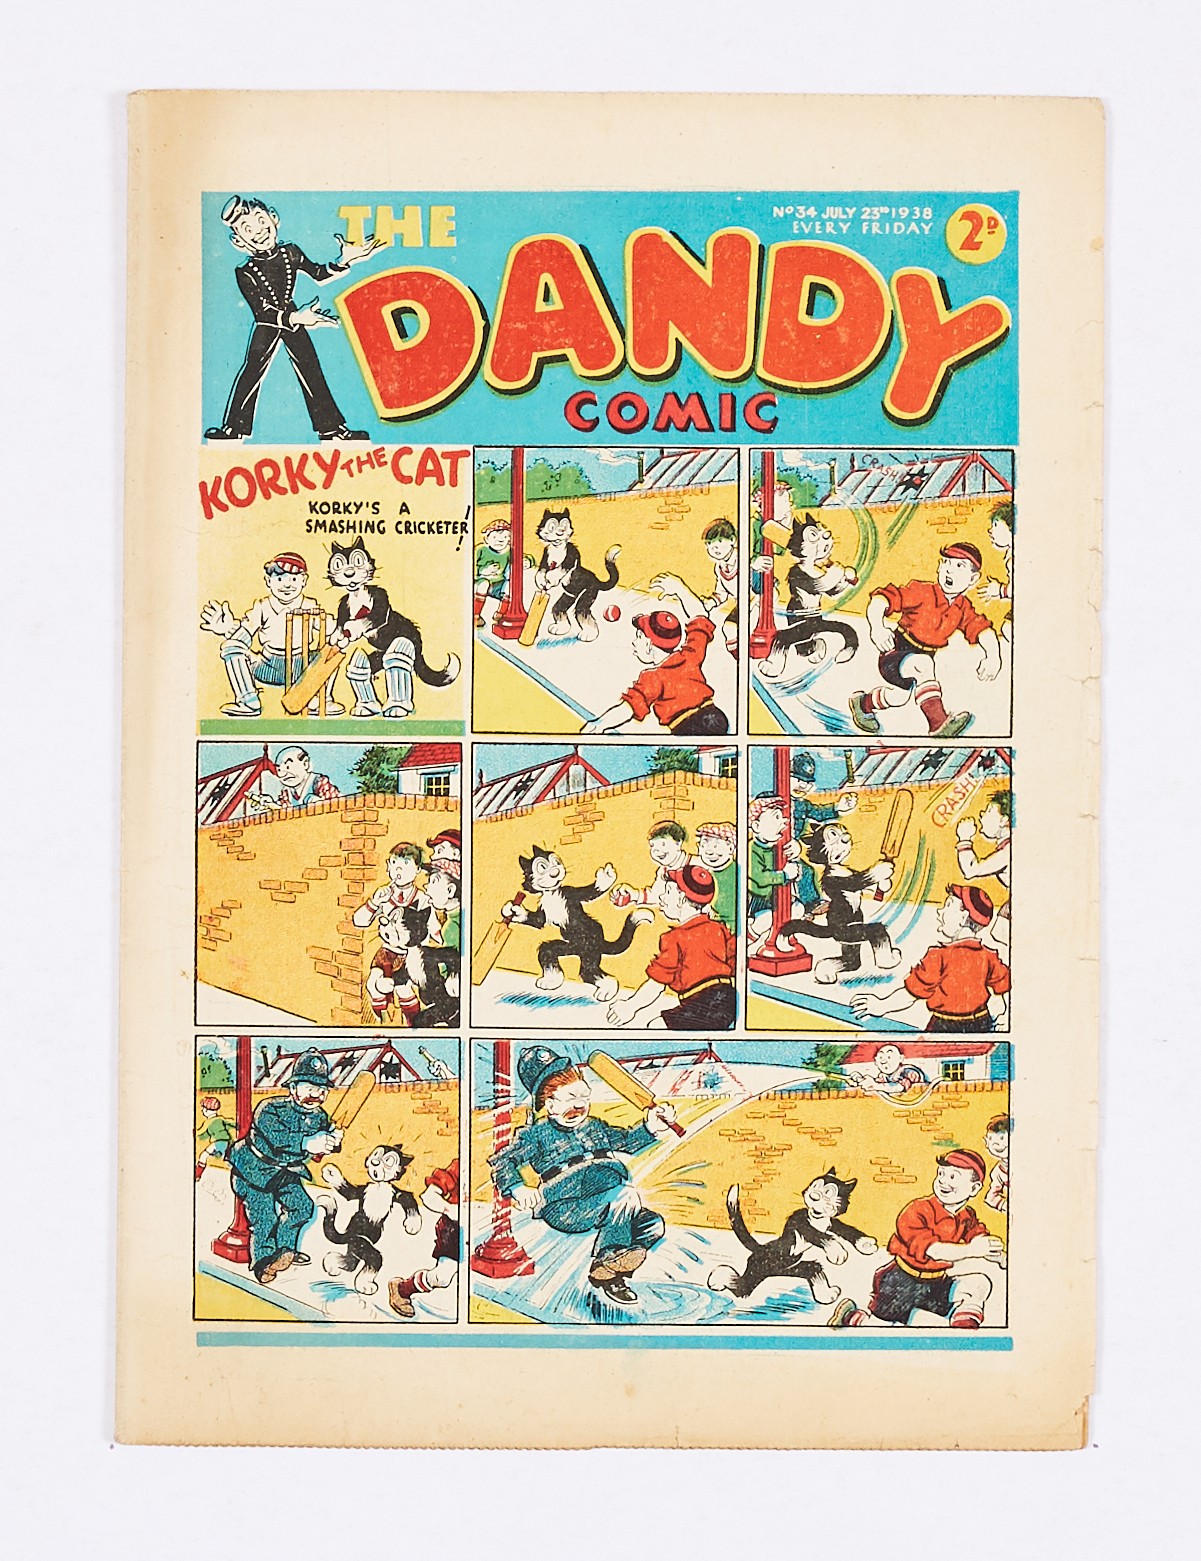 Dandy No 34 (1938). Pg 5 illustrated ad for Beano No 1. Bright cover colours with overhang edge wear